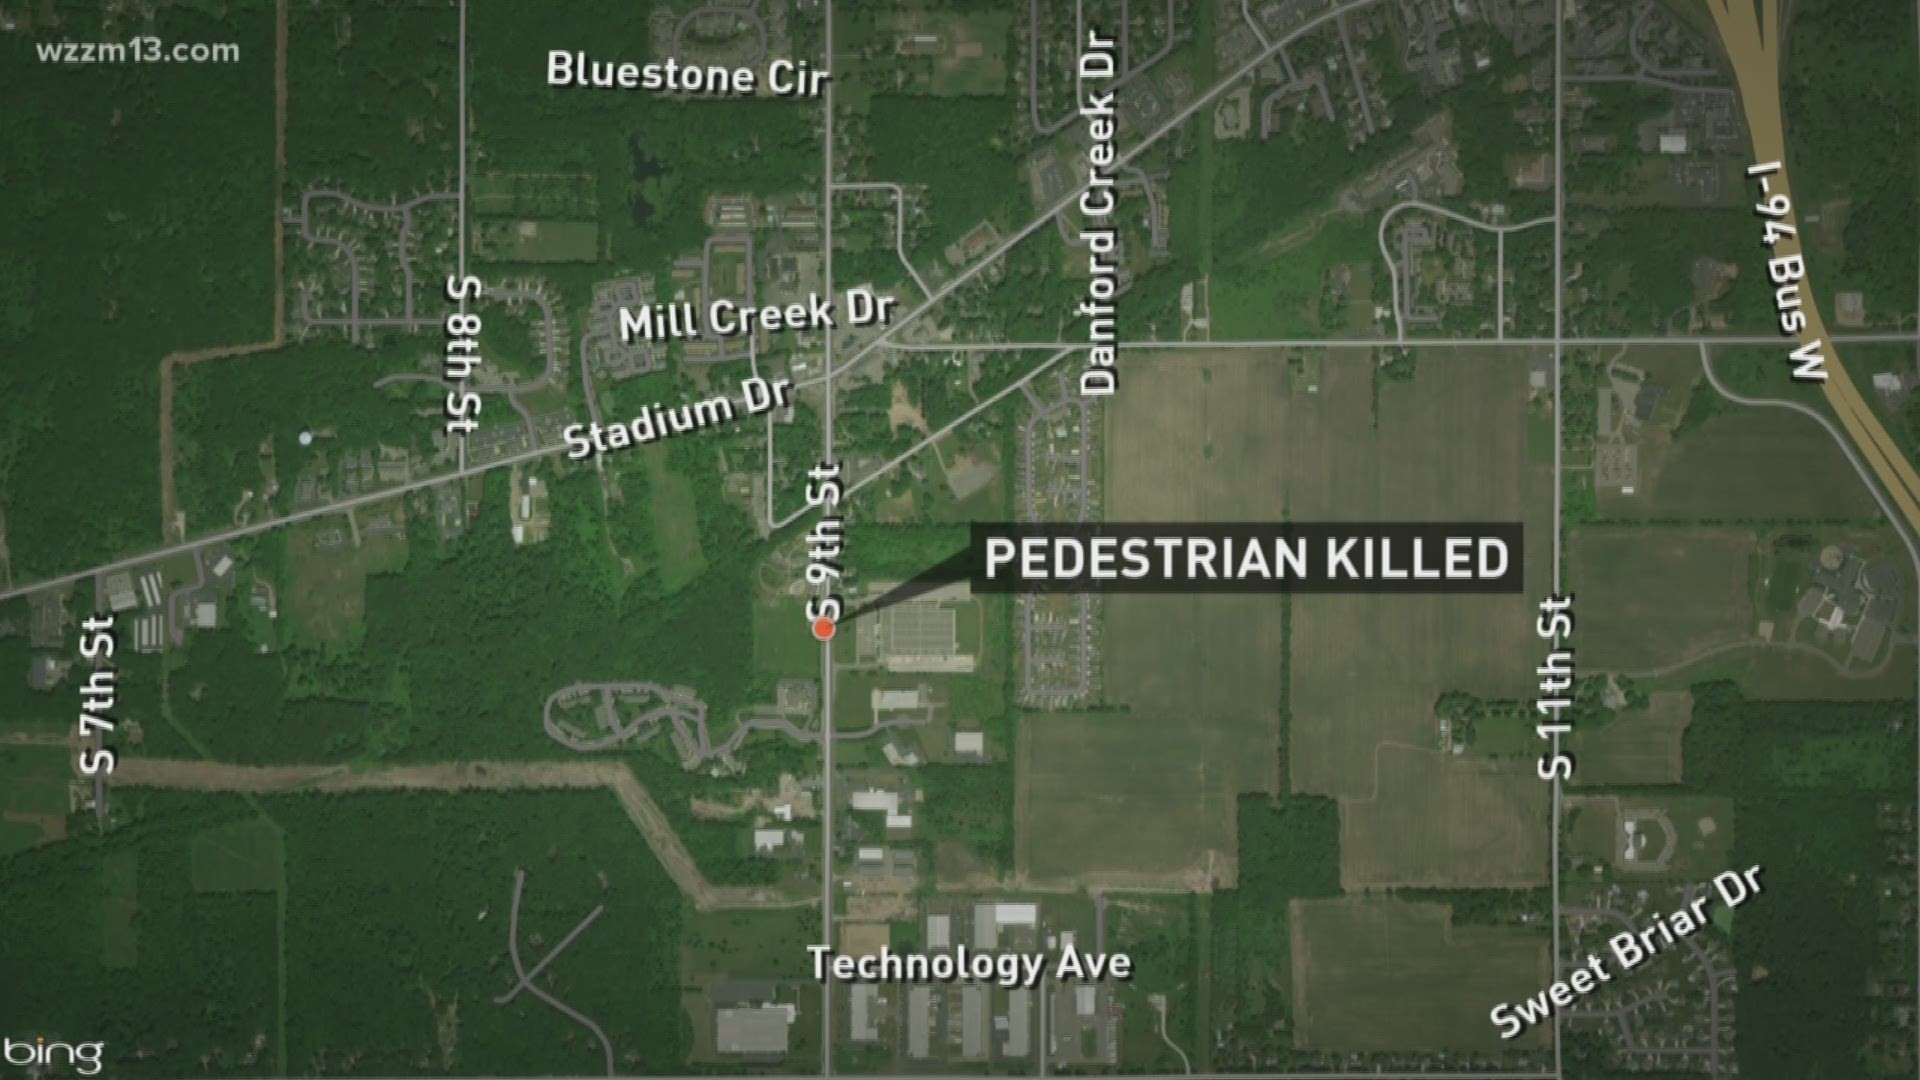 Deputies searching for hit-and-run suspect who killed a pedestrian